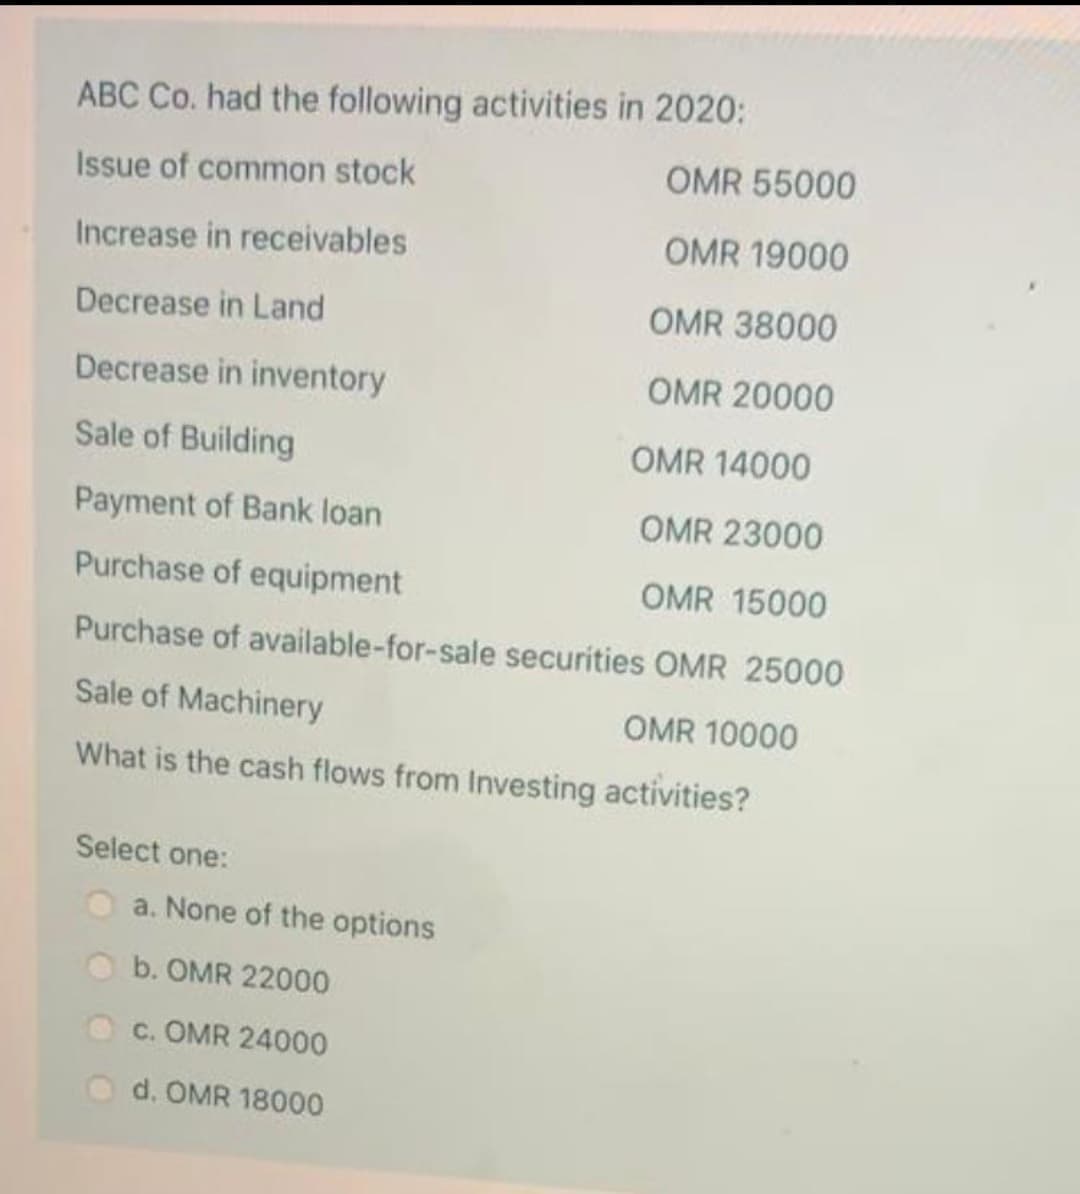 ABC Co. had the following activities in 2020:
OMR 55000
Issue of common stock
Increase in receivables
OMR 19000
Decrease in Land
OMR 38000
Decrease in inventory
OMR 20000
Sale of Building
OMR 14000
Payment of Bank loan
OMR 23000
Purchase of equipment
OMR 15000
Purchase of available-for-sale securities OMR 25000
Sale of Machinery
OMR 10000
What is the cash flows from Investing activities?
Select one:
a. None of the options
b. OMR 22000
c. OMR 24000
d. OMR 18000
